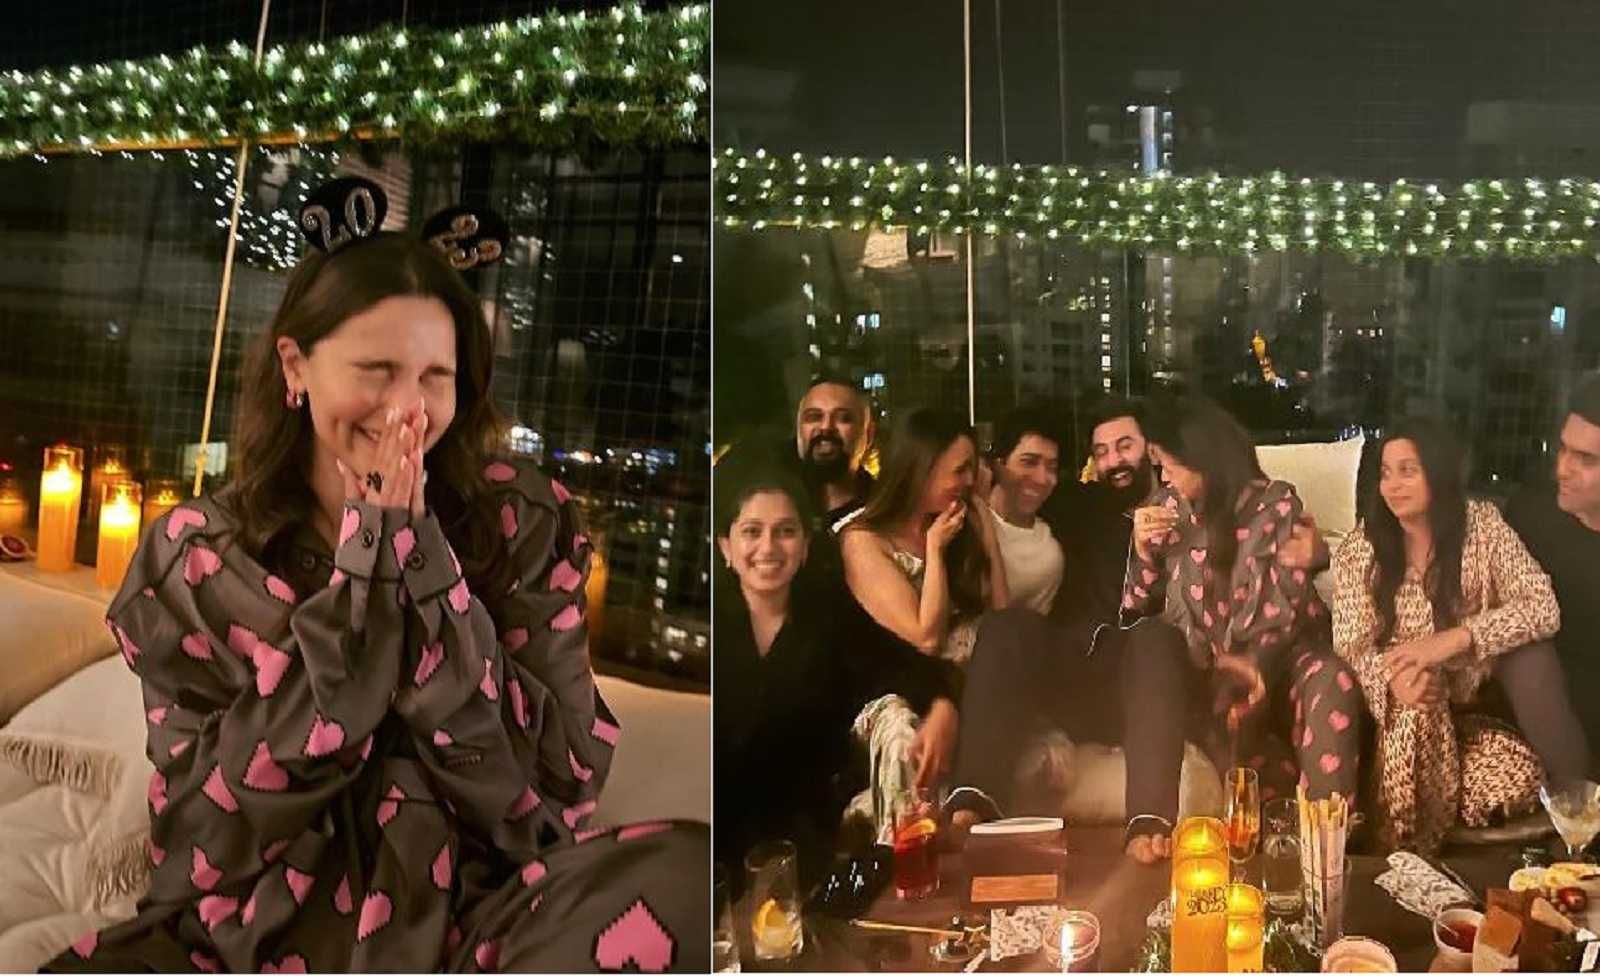 Alia Bhatt-Ranbir Kapoor's cozy new year celebration with friends was all about love, friends and laughs